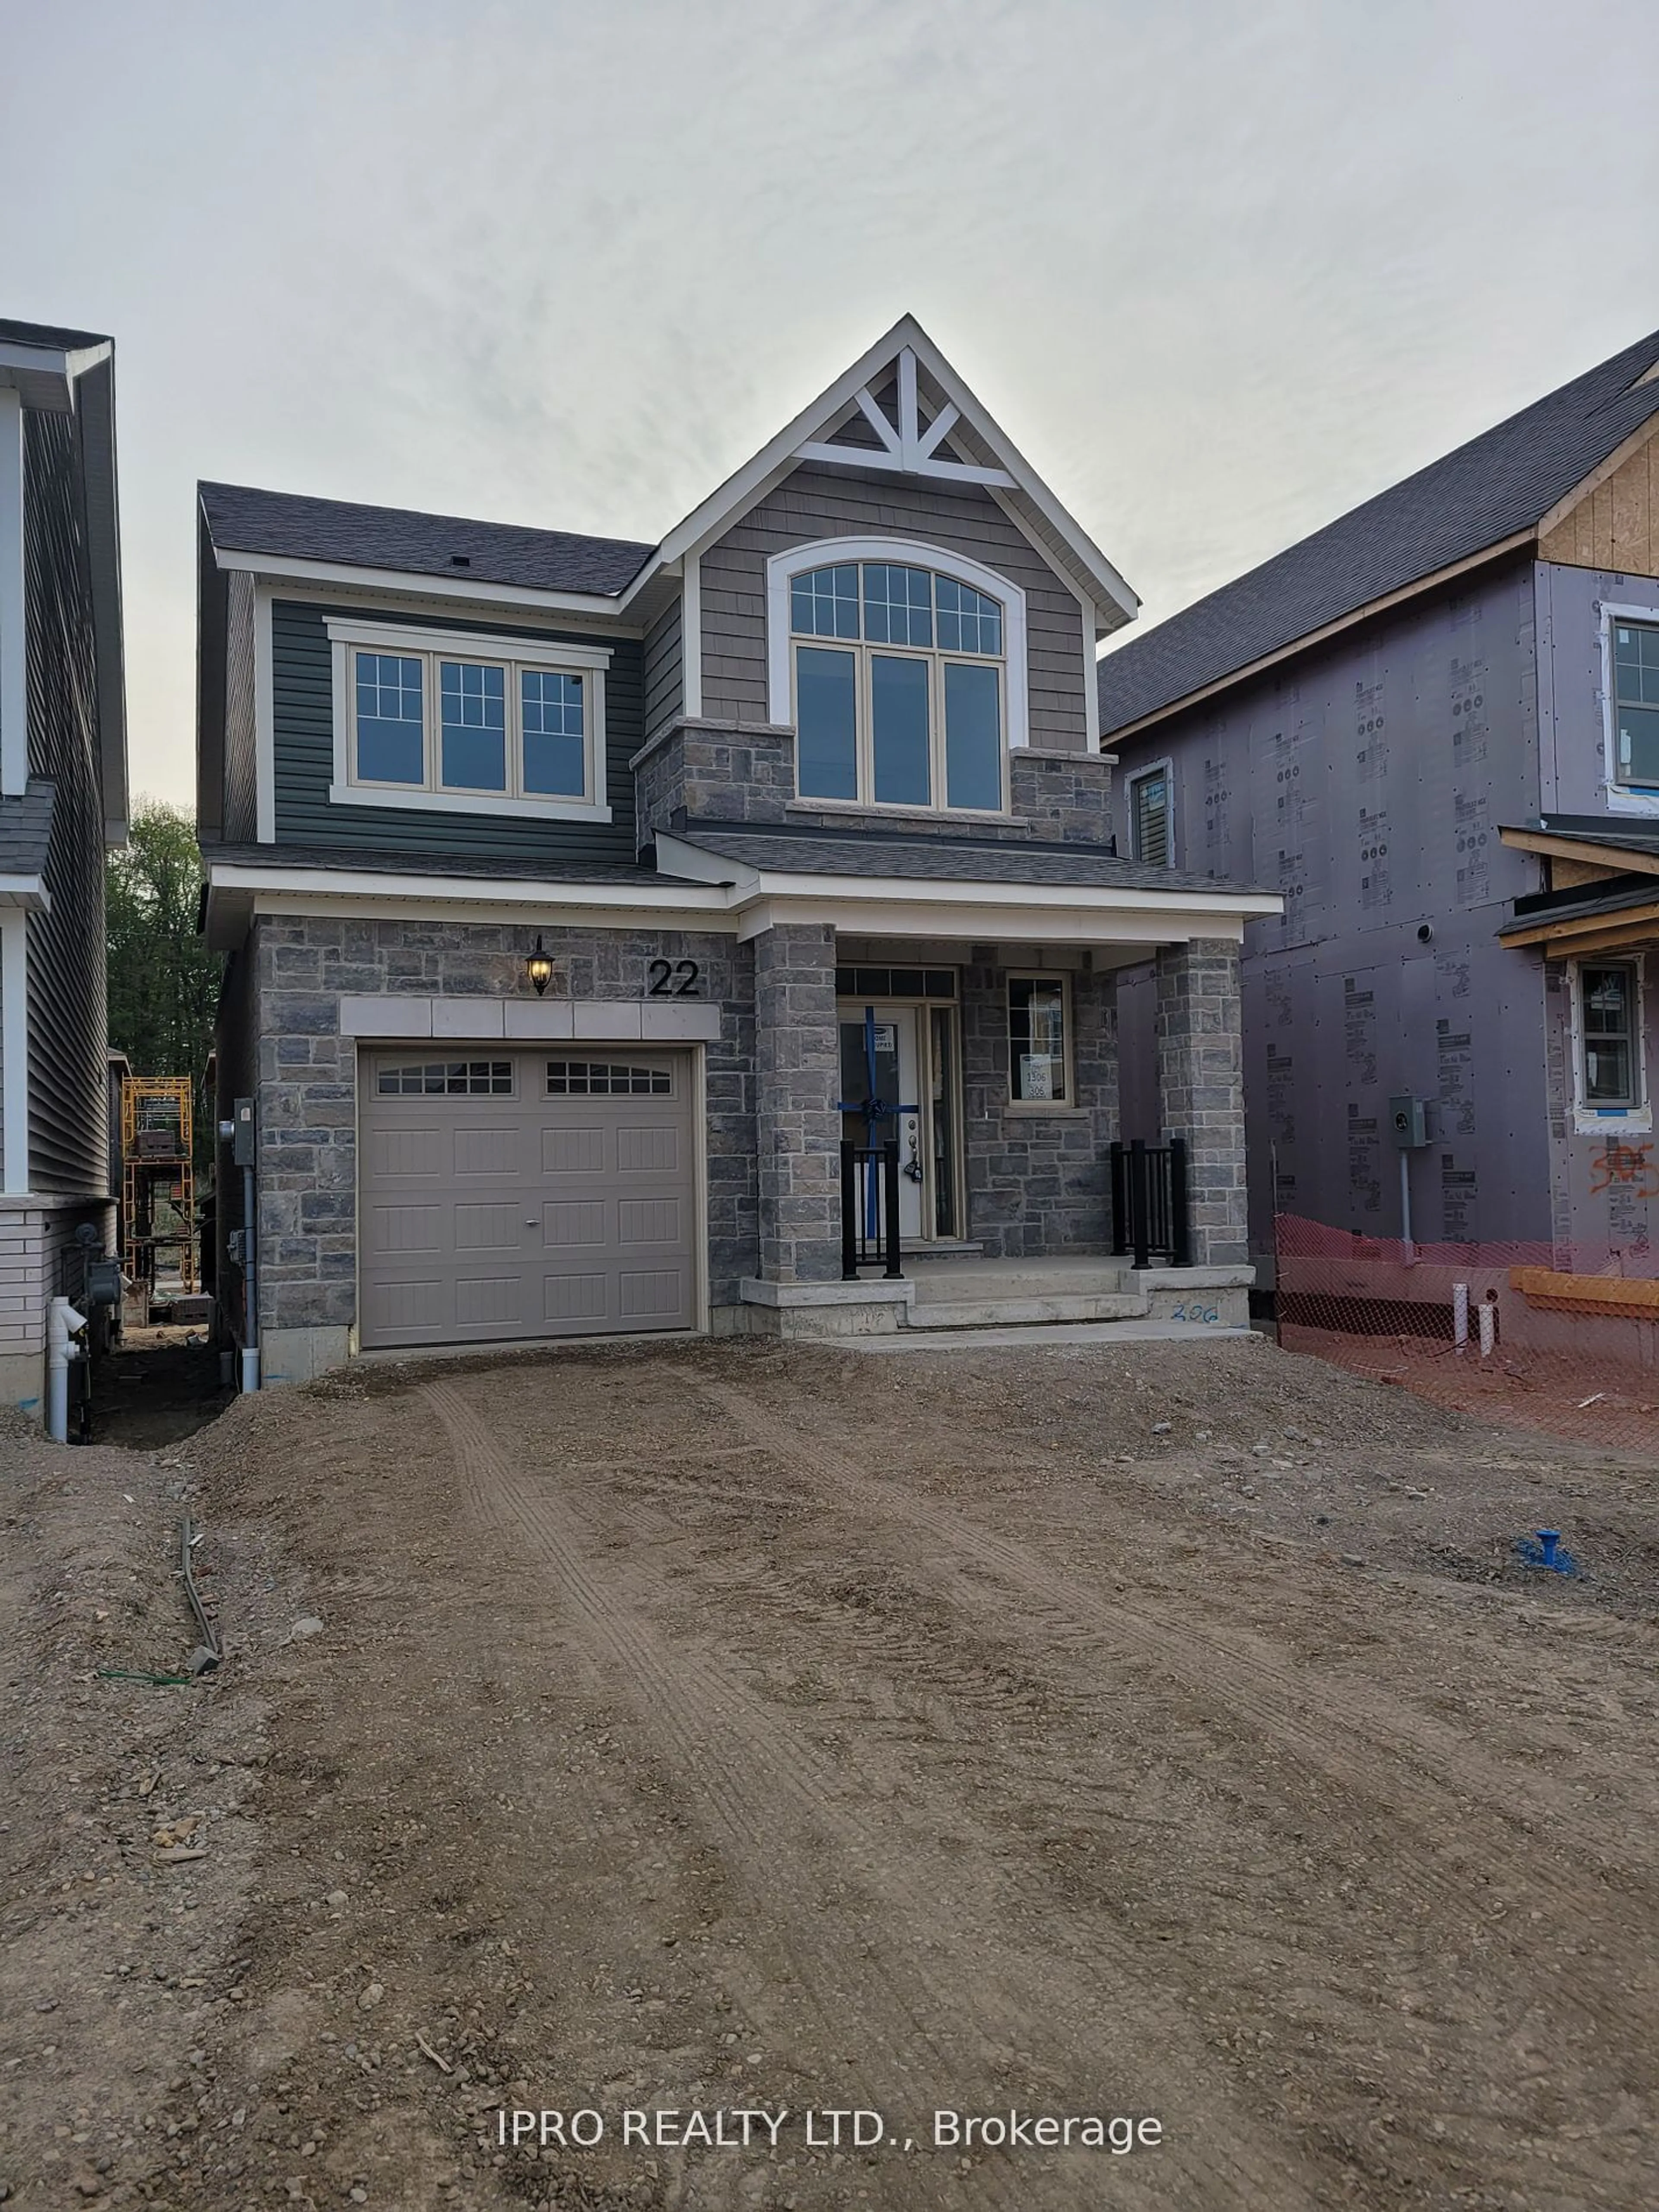 Home with brick exterior material for 22 Milt Schmidt St, Kitchener Ontario N2E 3Y2